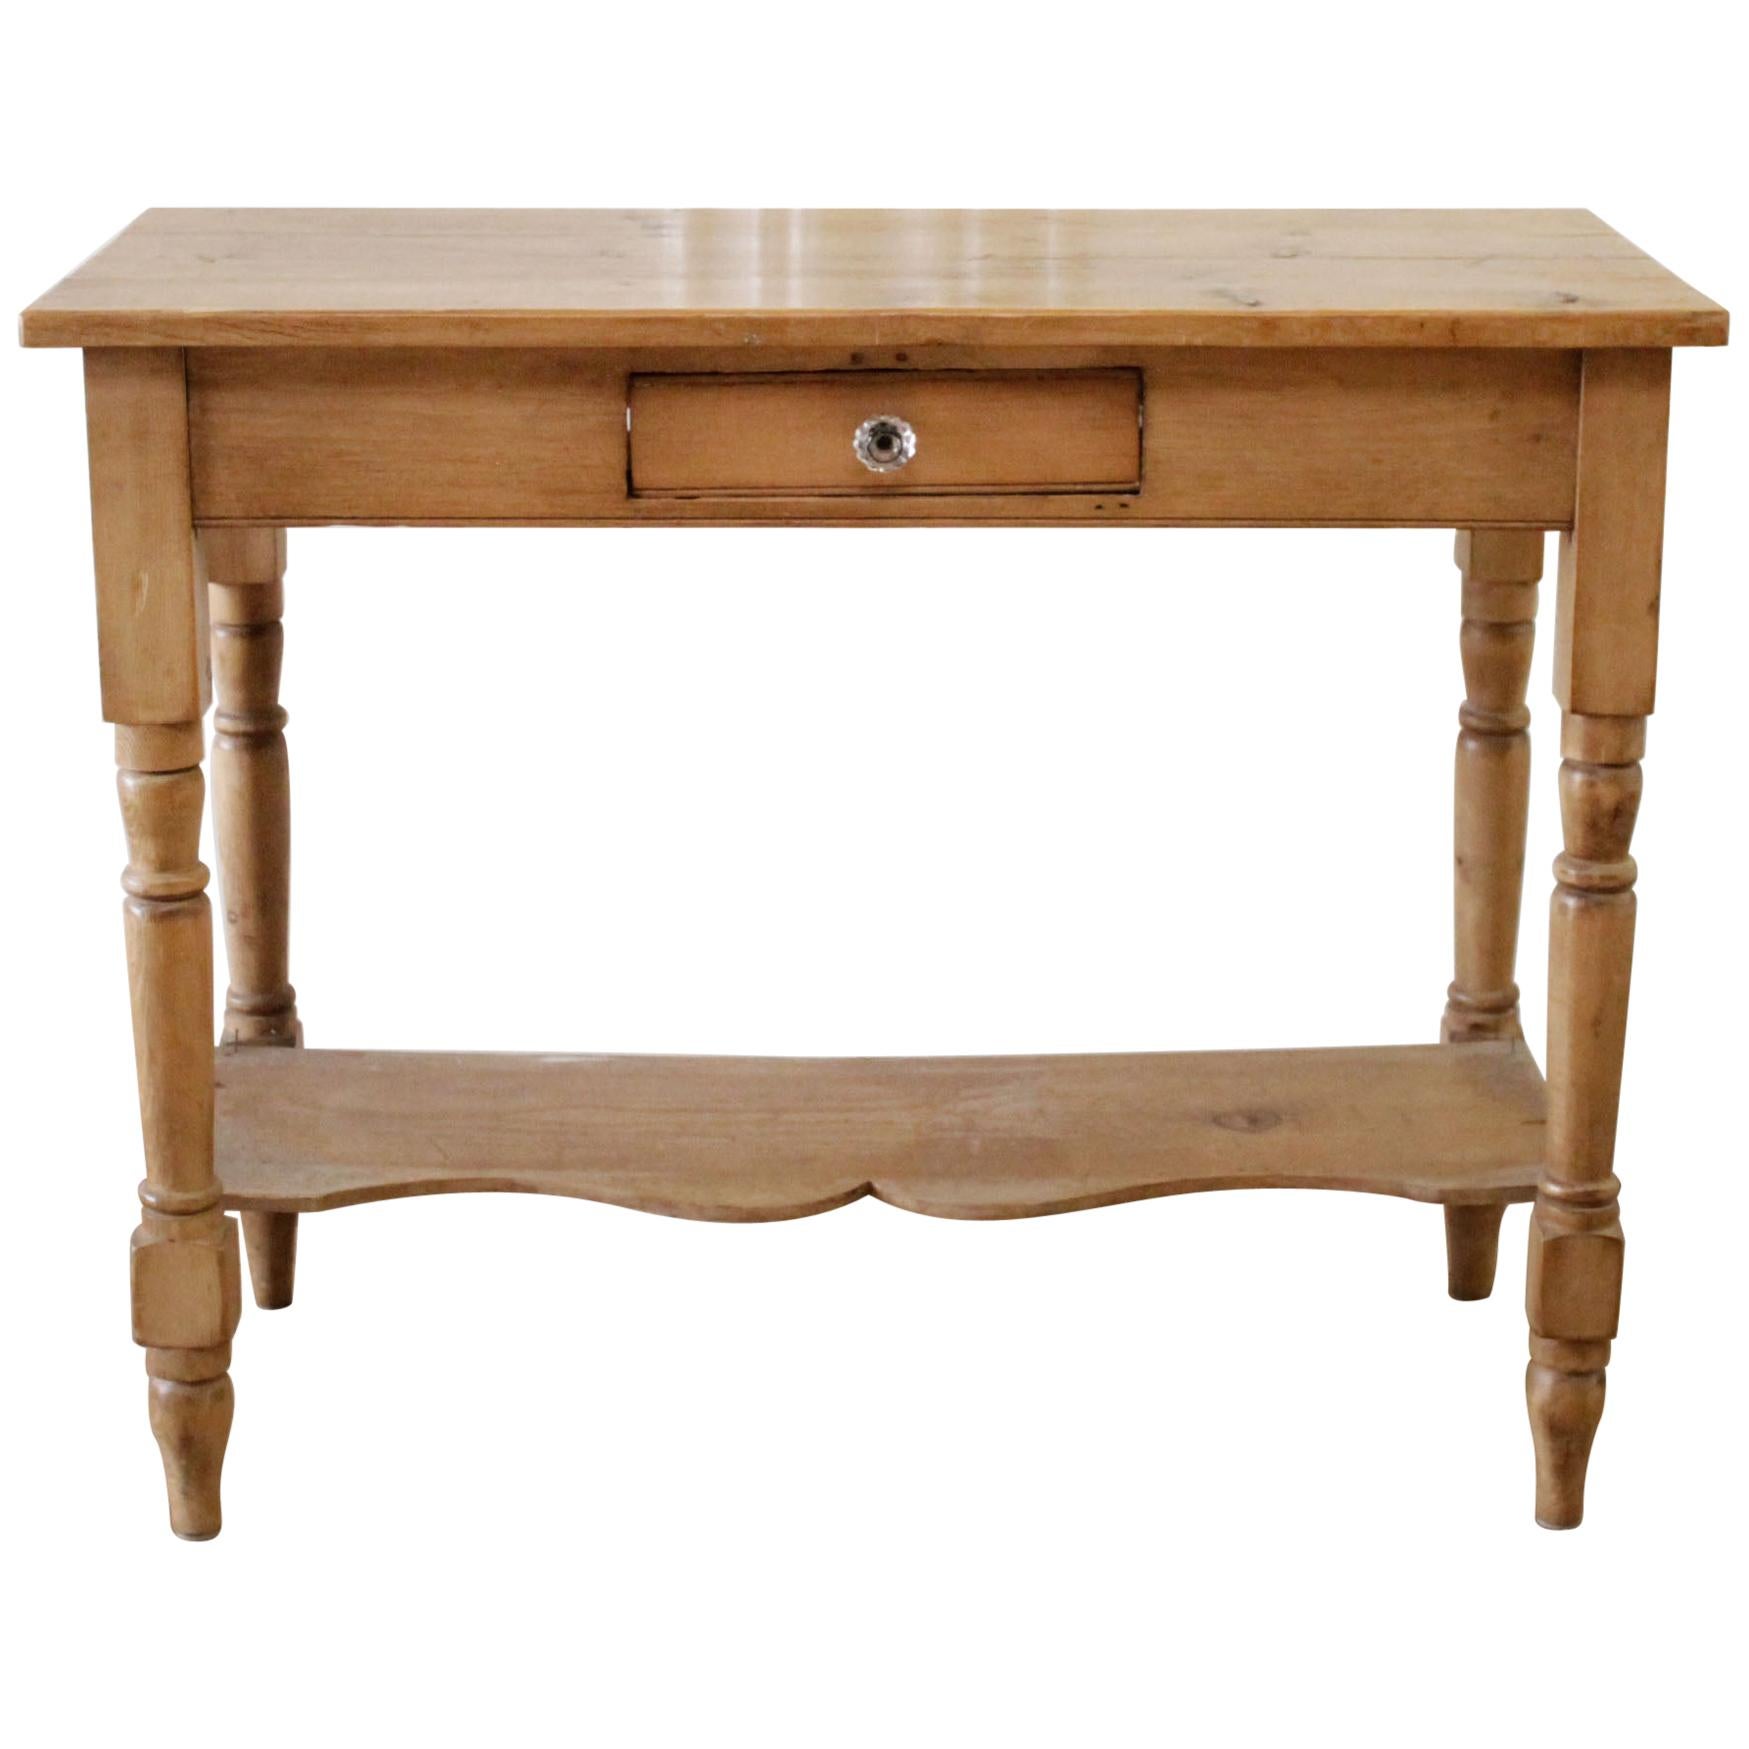 Antique Pine Console Table with Drawer